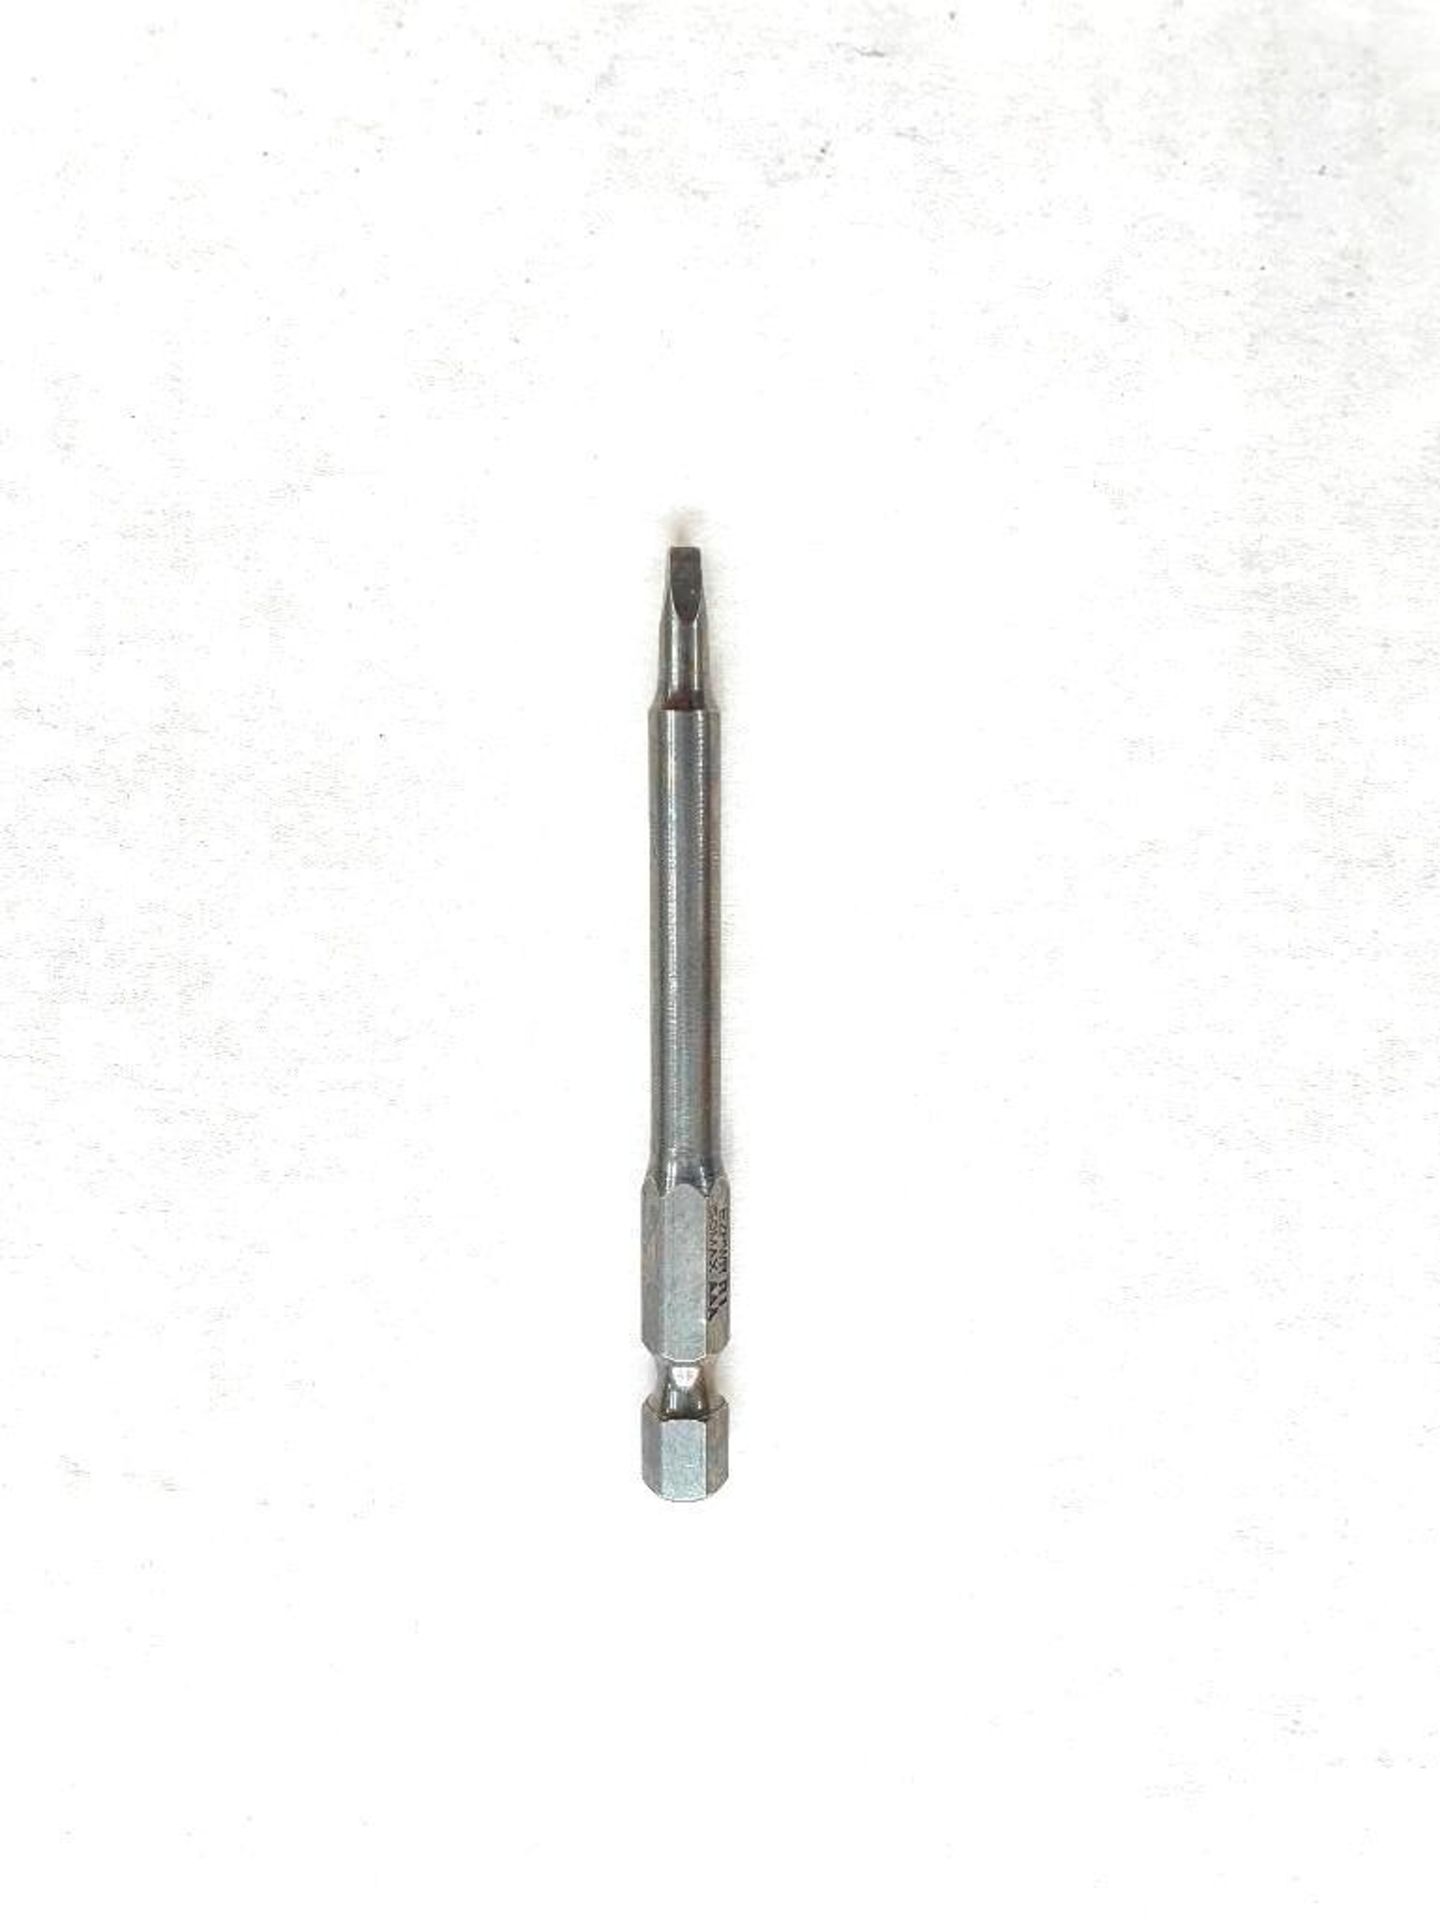 (1800) SQUARE RECESS BIT, SIZE R1, 3" BRAND/MODEL EAZYPOWER 79382 RETAIL PRICE (TOTAL): $3,222.00 LO